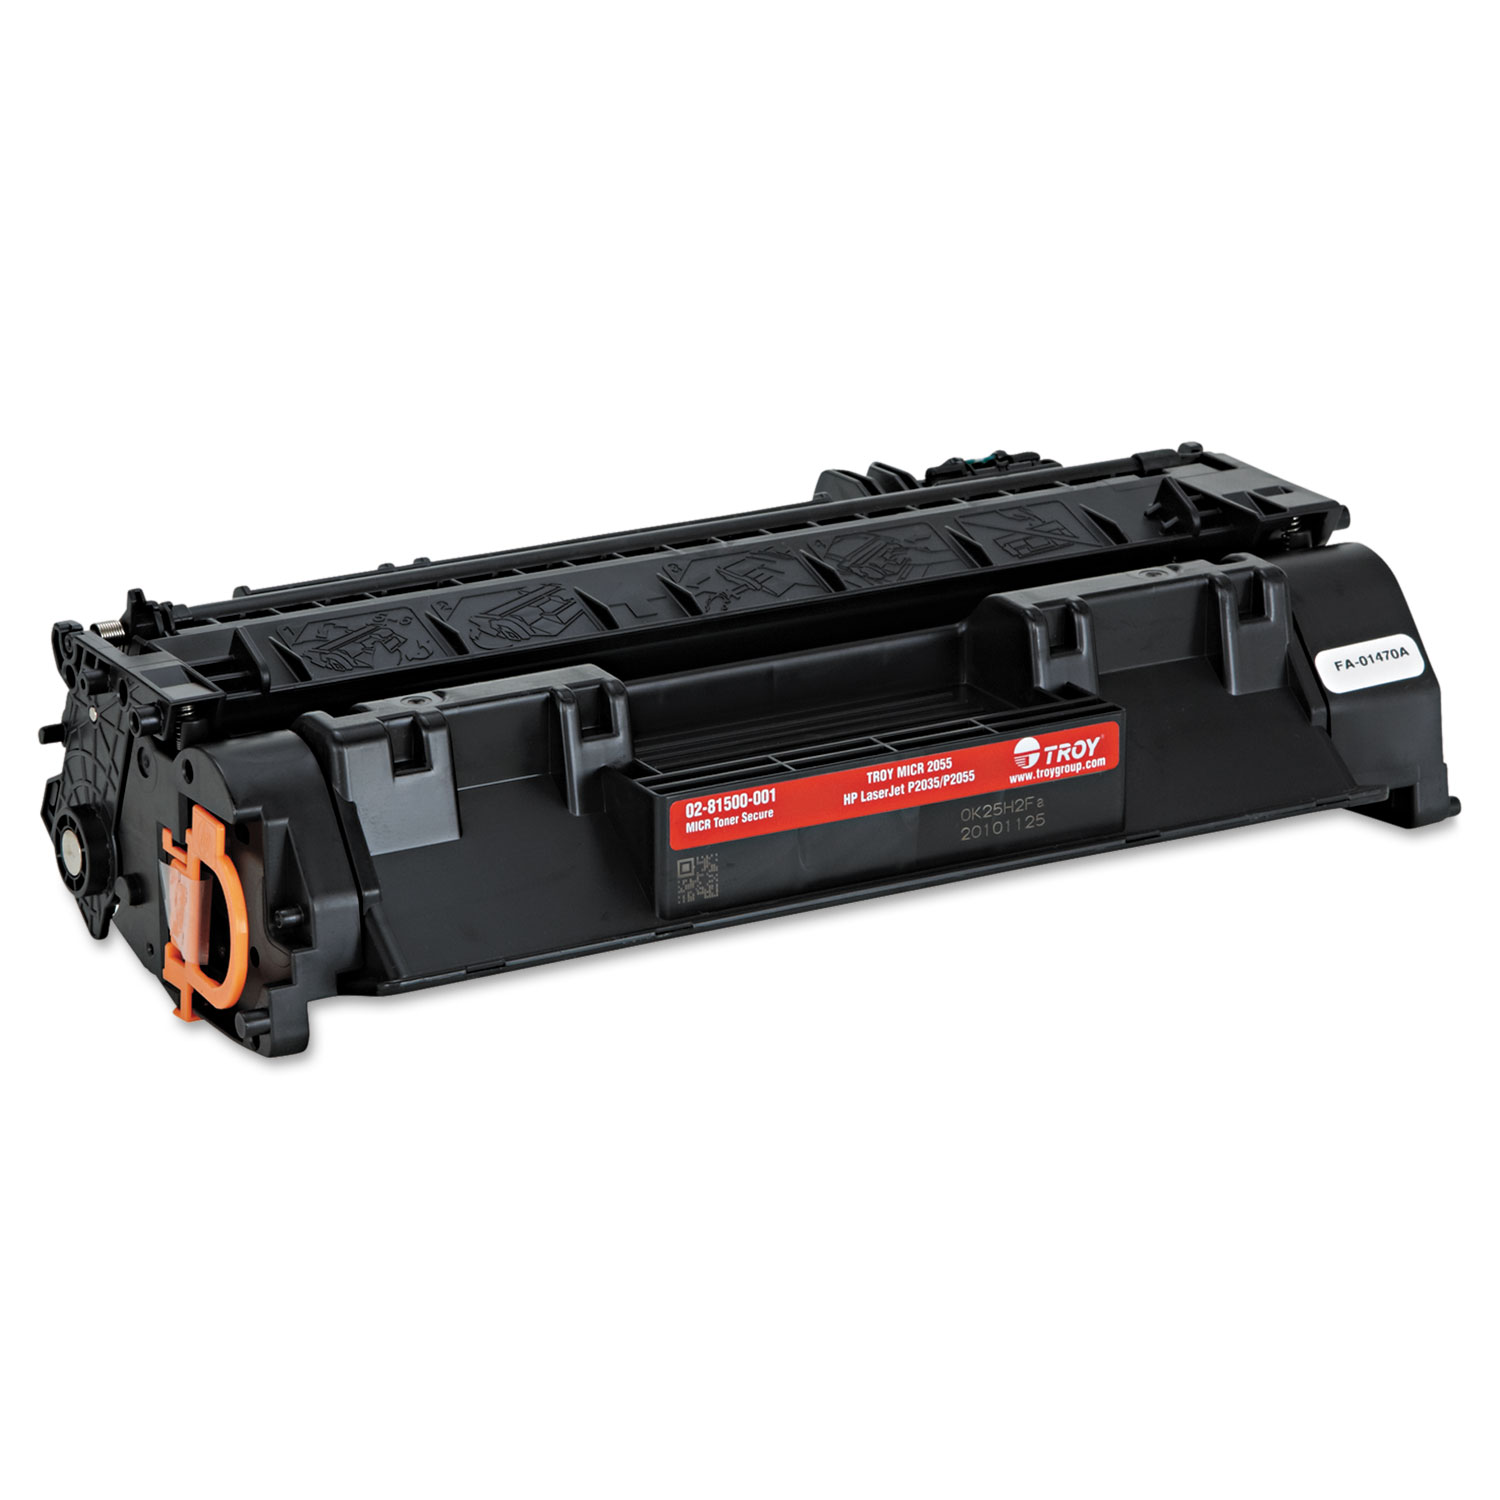  TROY 02-81500-001 0281500001 05A MICR Toner Secure, Alternative for HP CE505A, Black (TRS0281500001) 